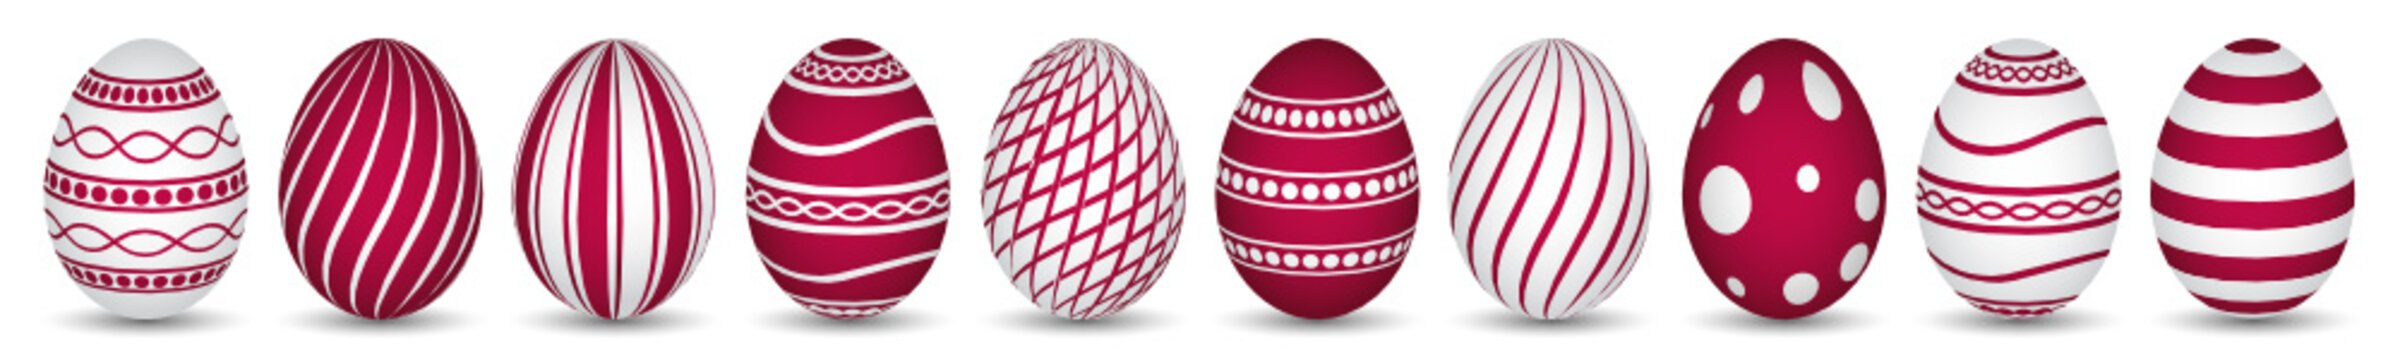 10 easter eggs in red